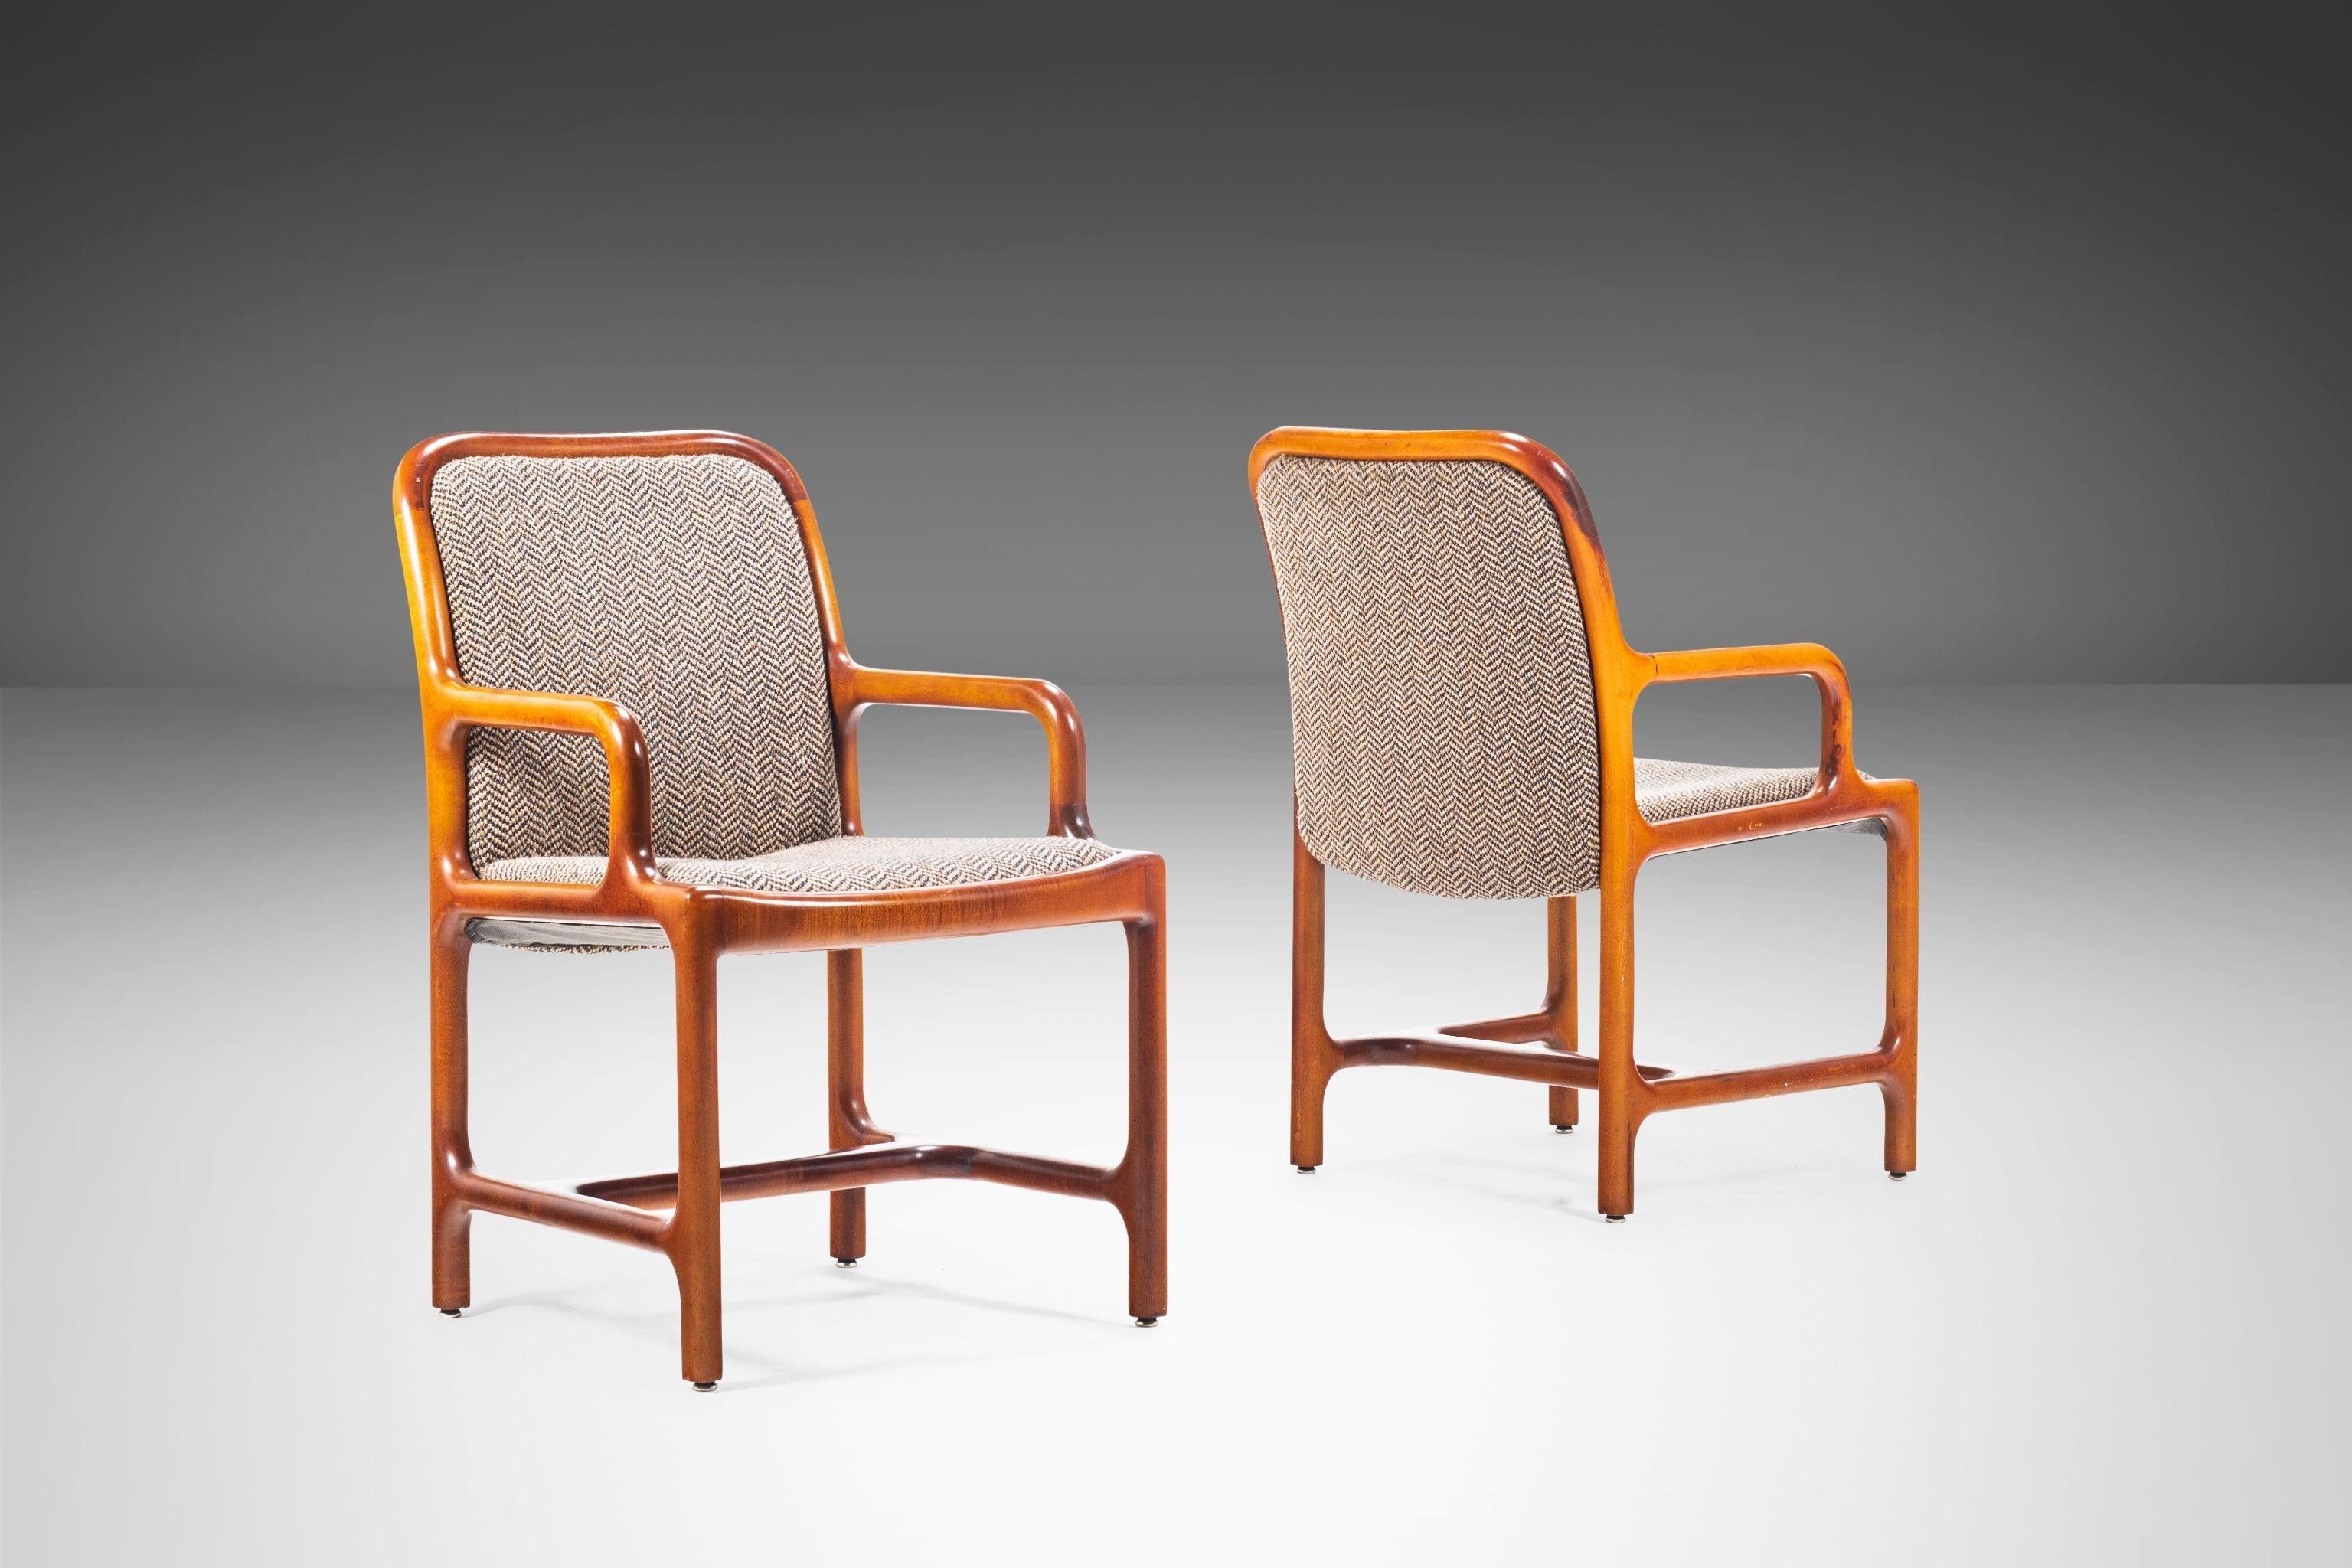 Set of Two '2' Mid-Century Modern Pretzel Chairs in Oak and Original Tweed, USA For Sale 7